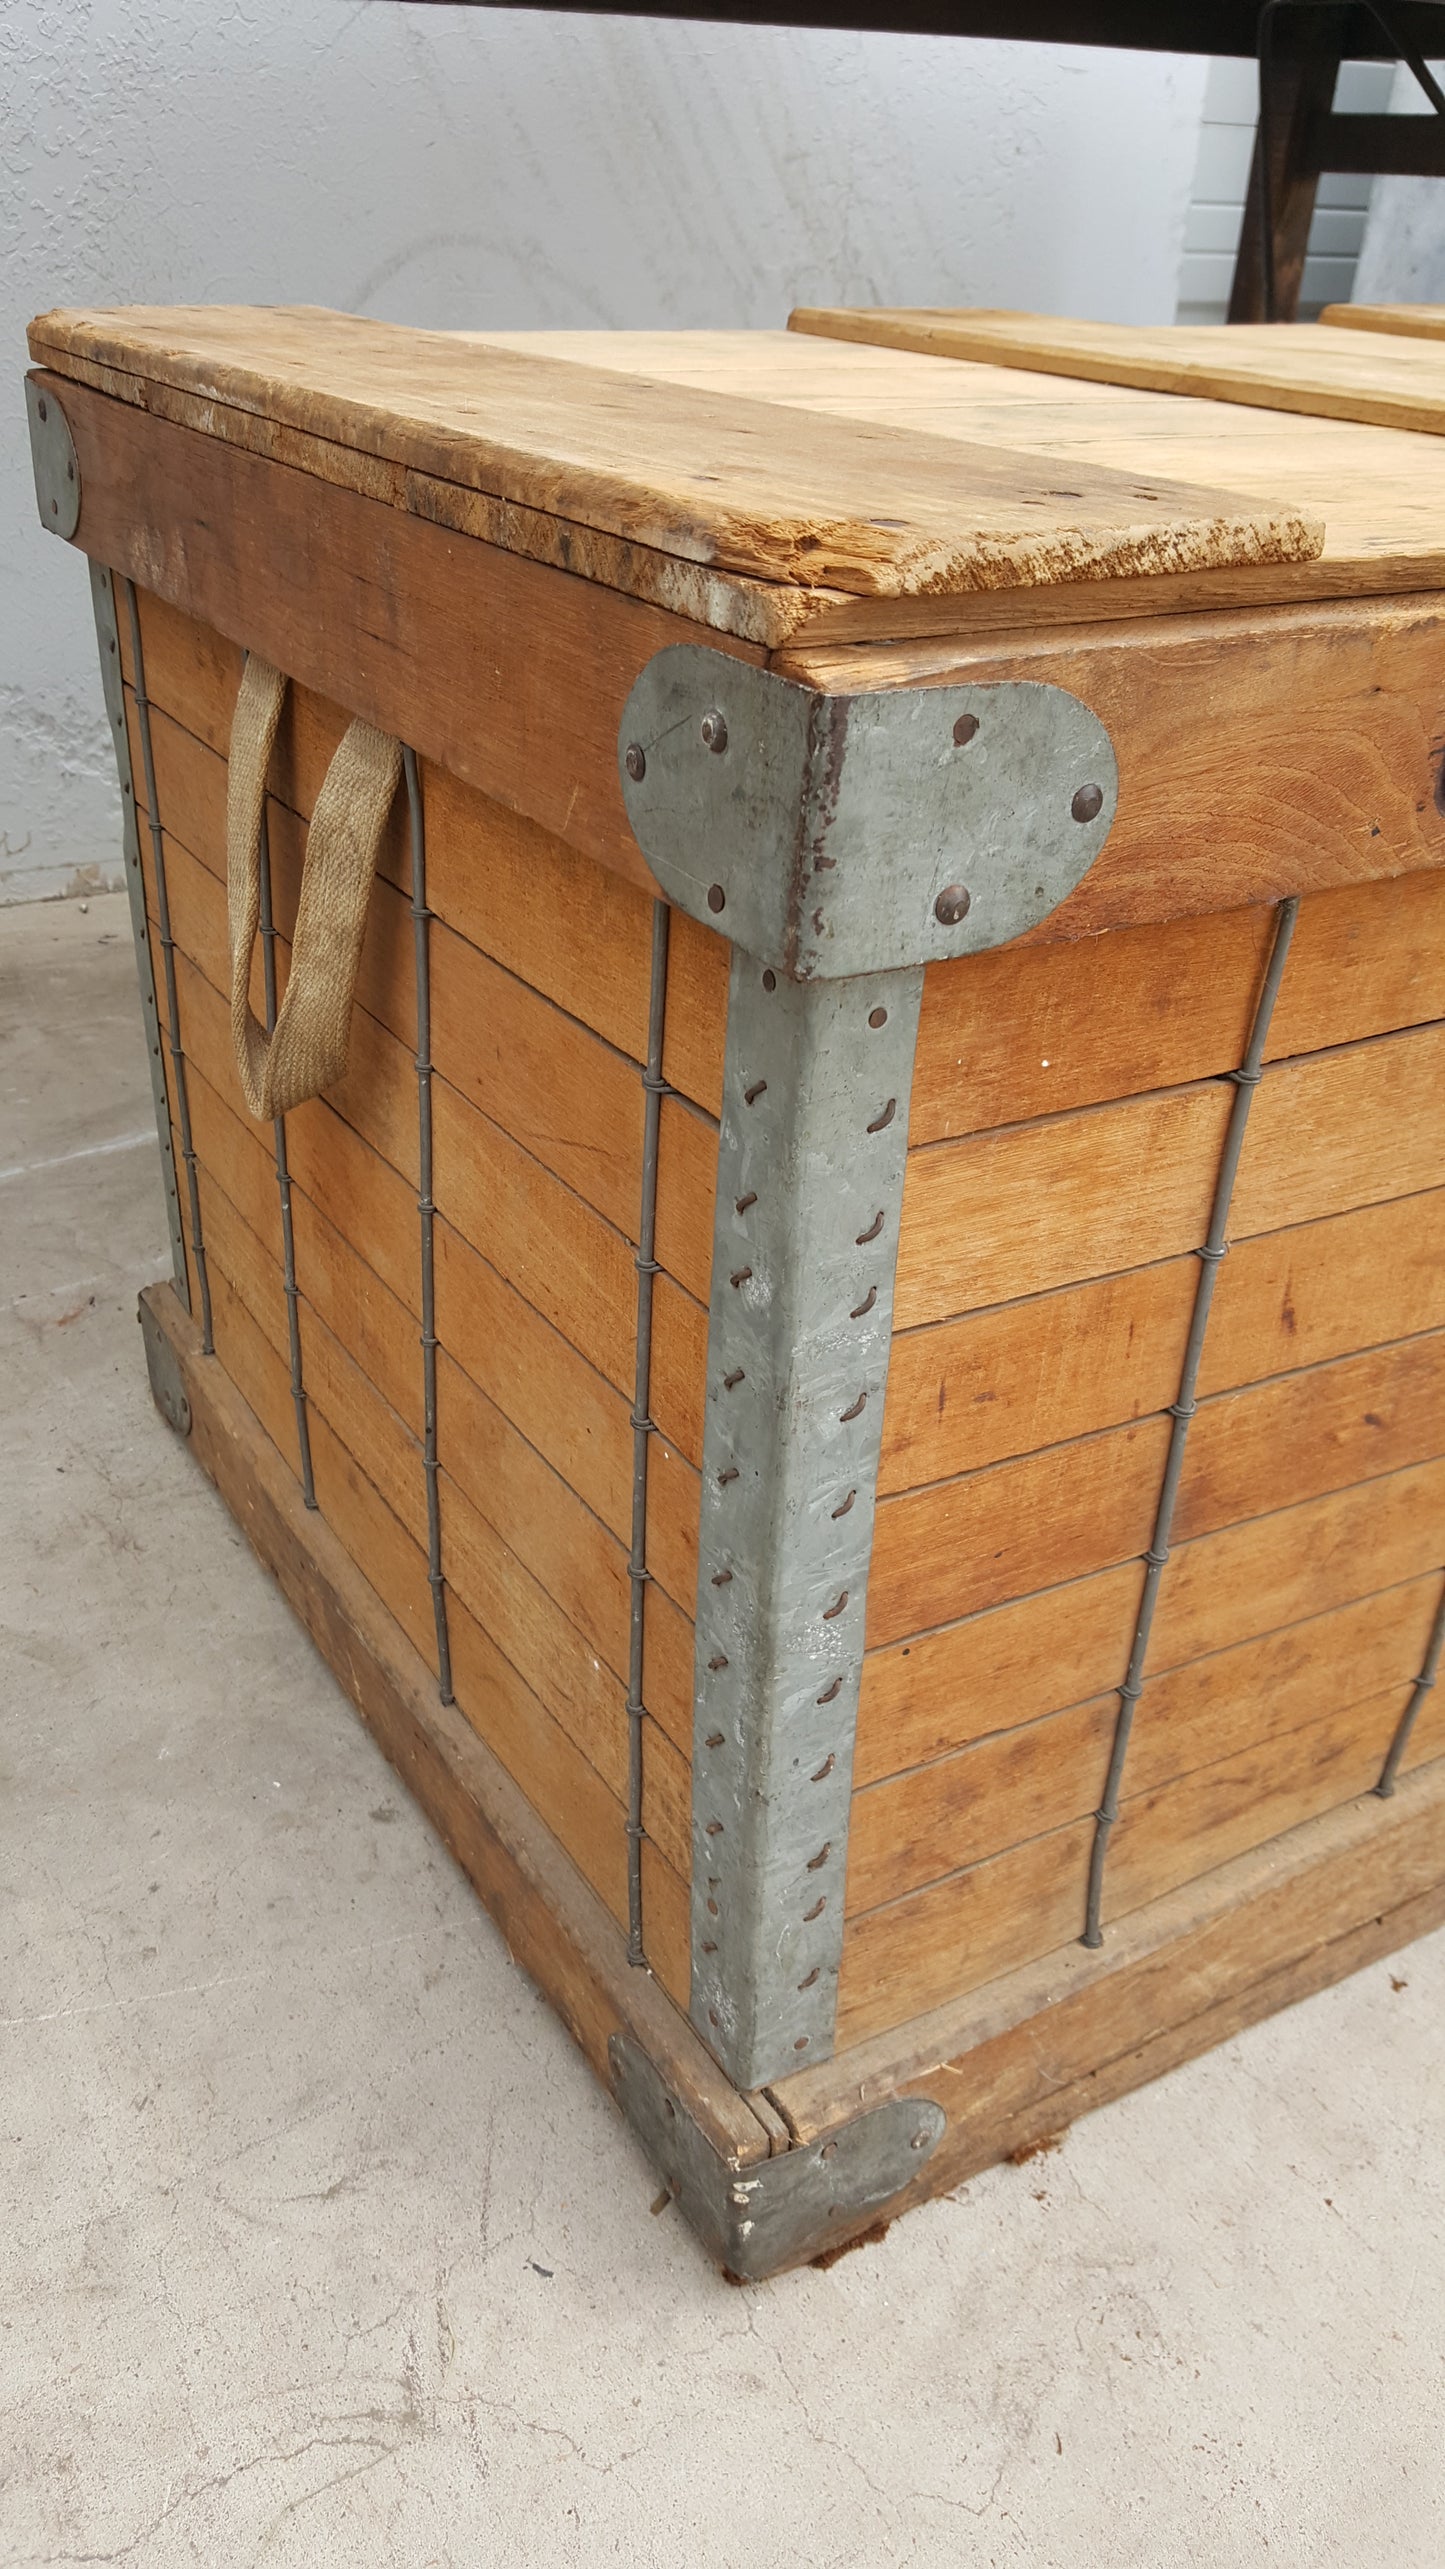 Old Wooden Trunk with Lid